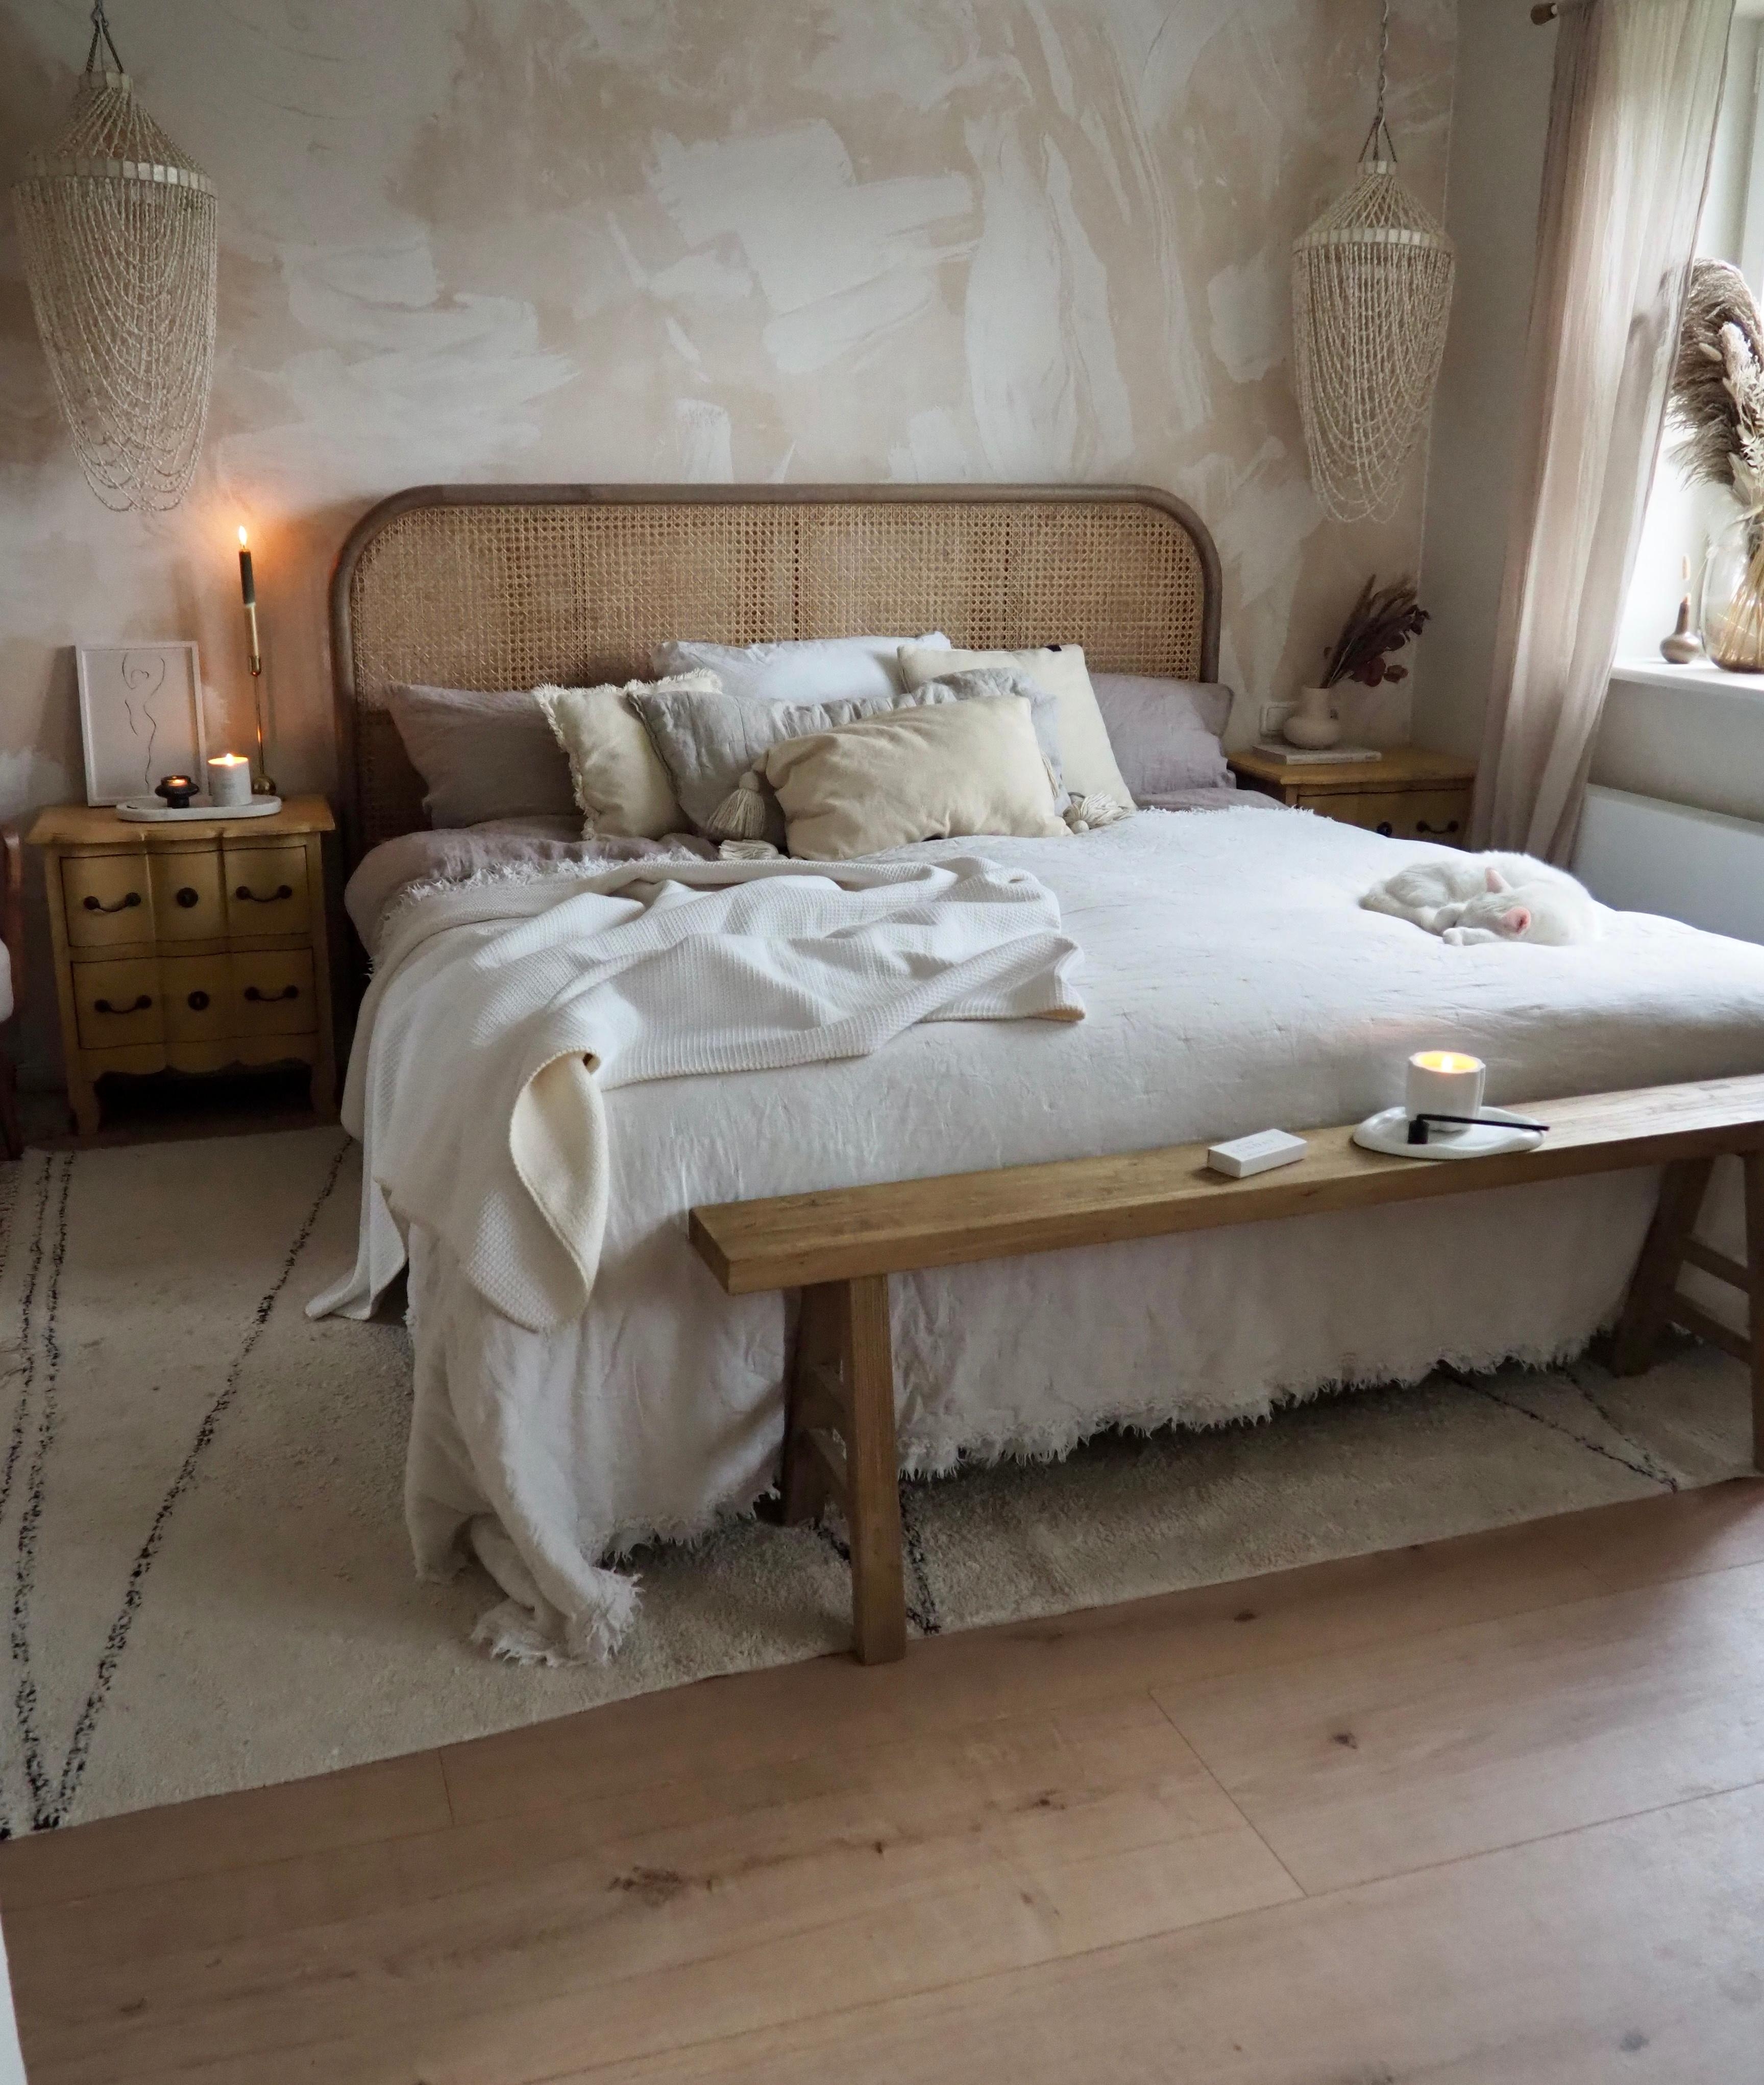 #schlafzimmer #cozy #bedroom #COUCHstyle #couchmagazin